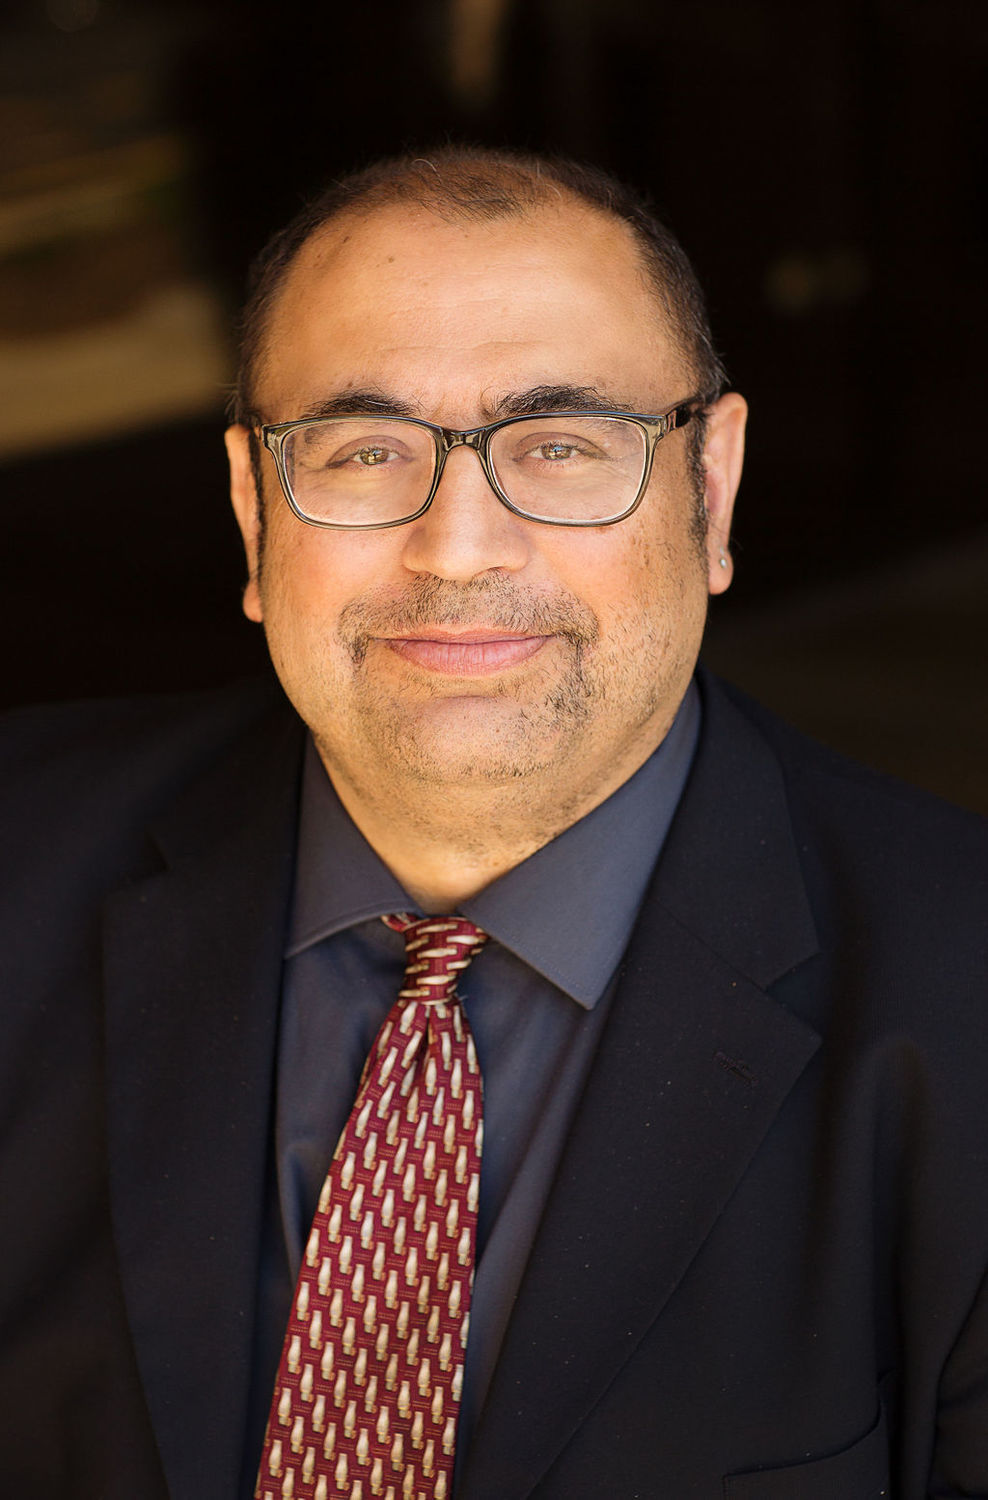 Gallery Photo of Cesar Madrigal, PhD, LCSW - Owner & Therapist